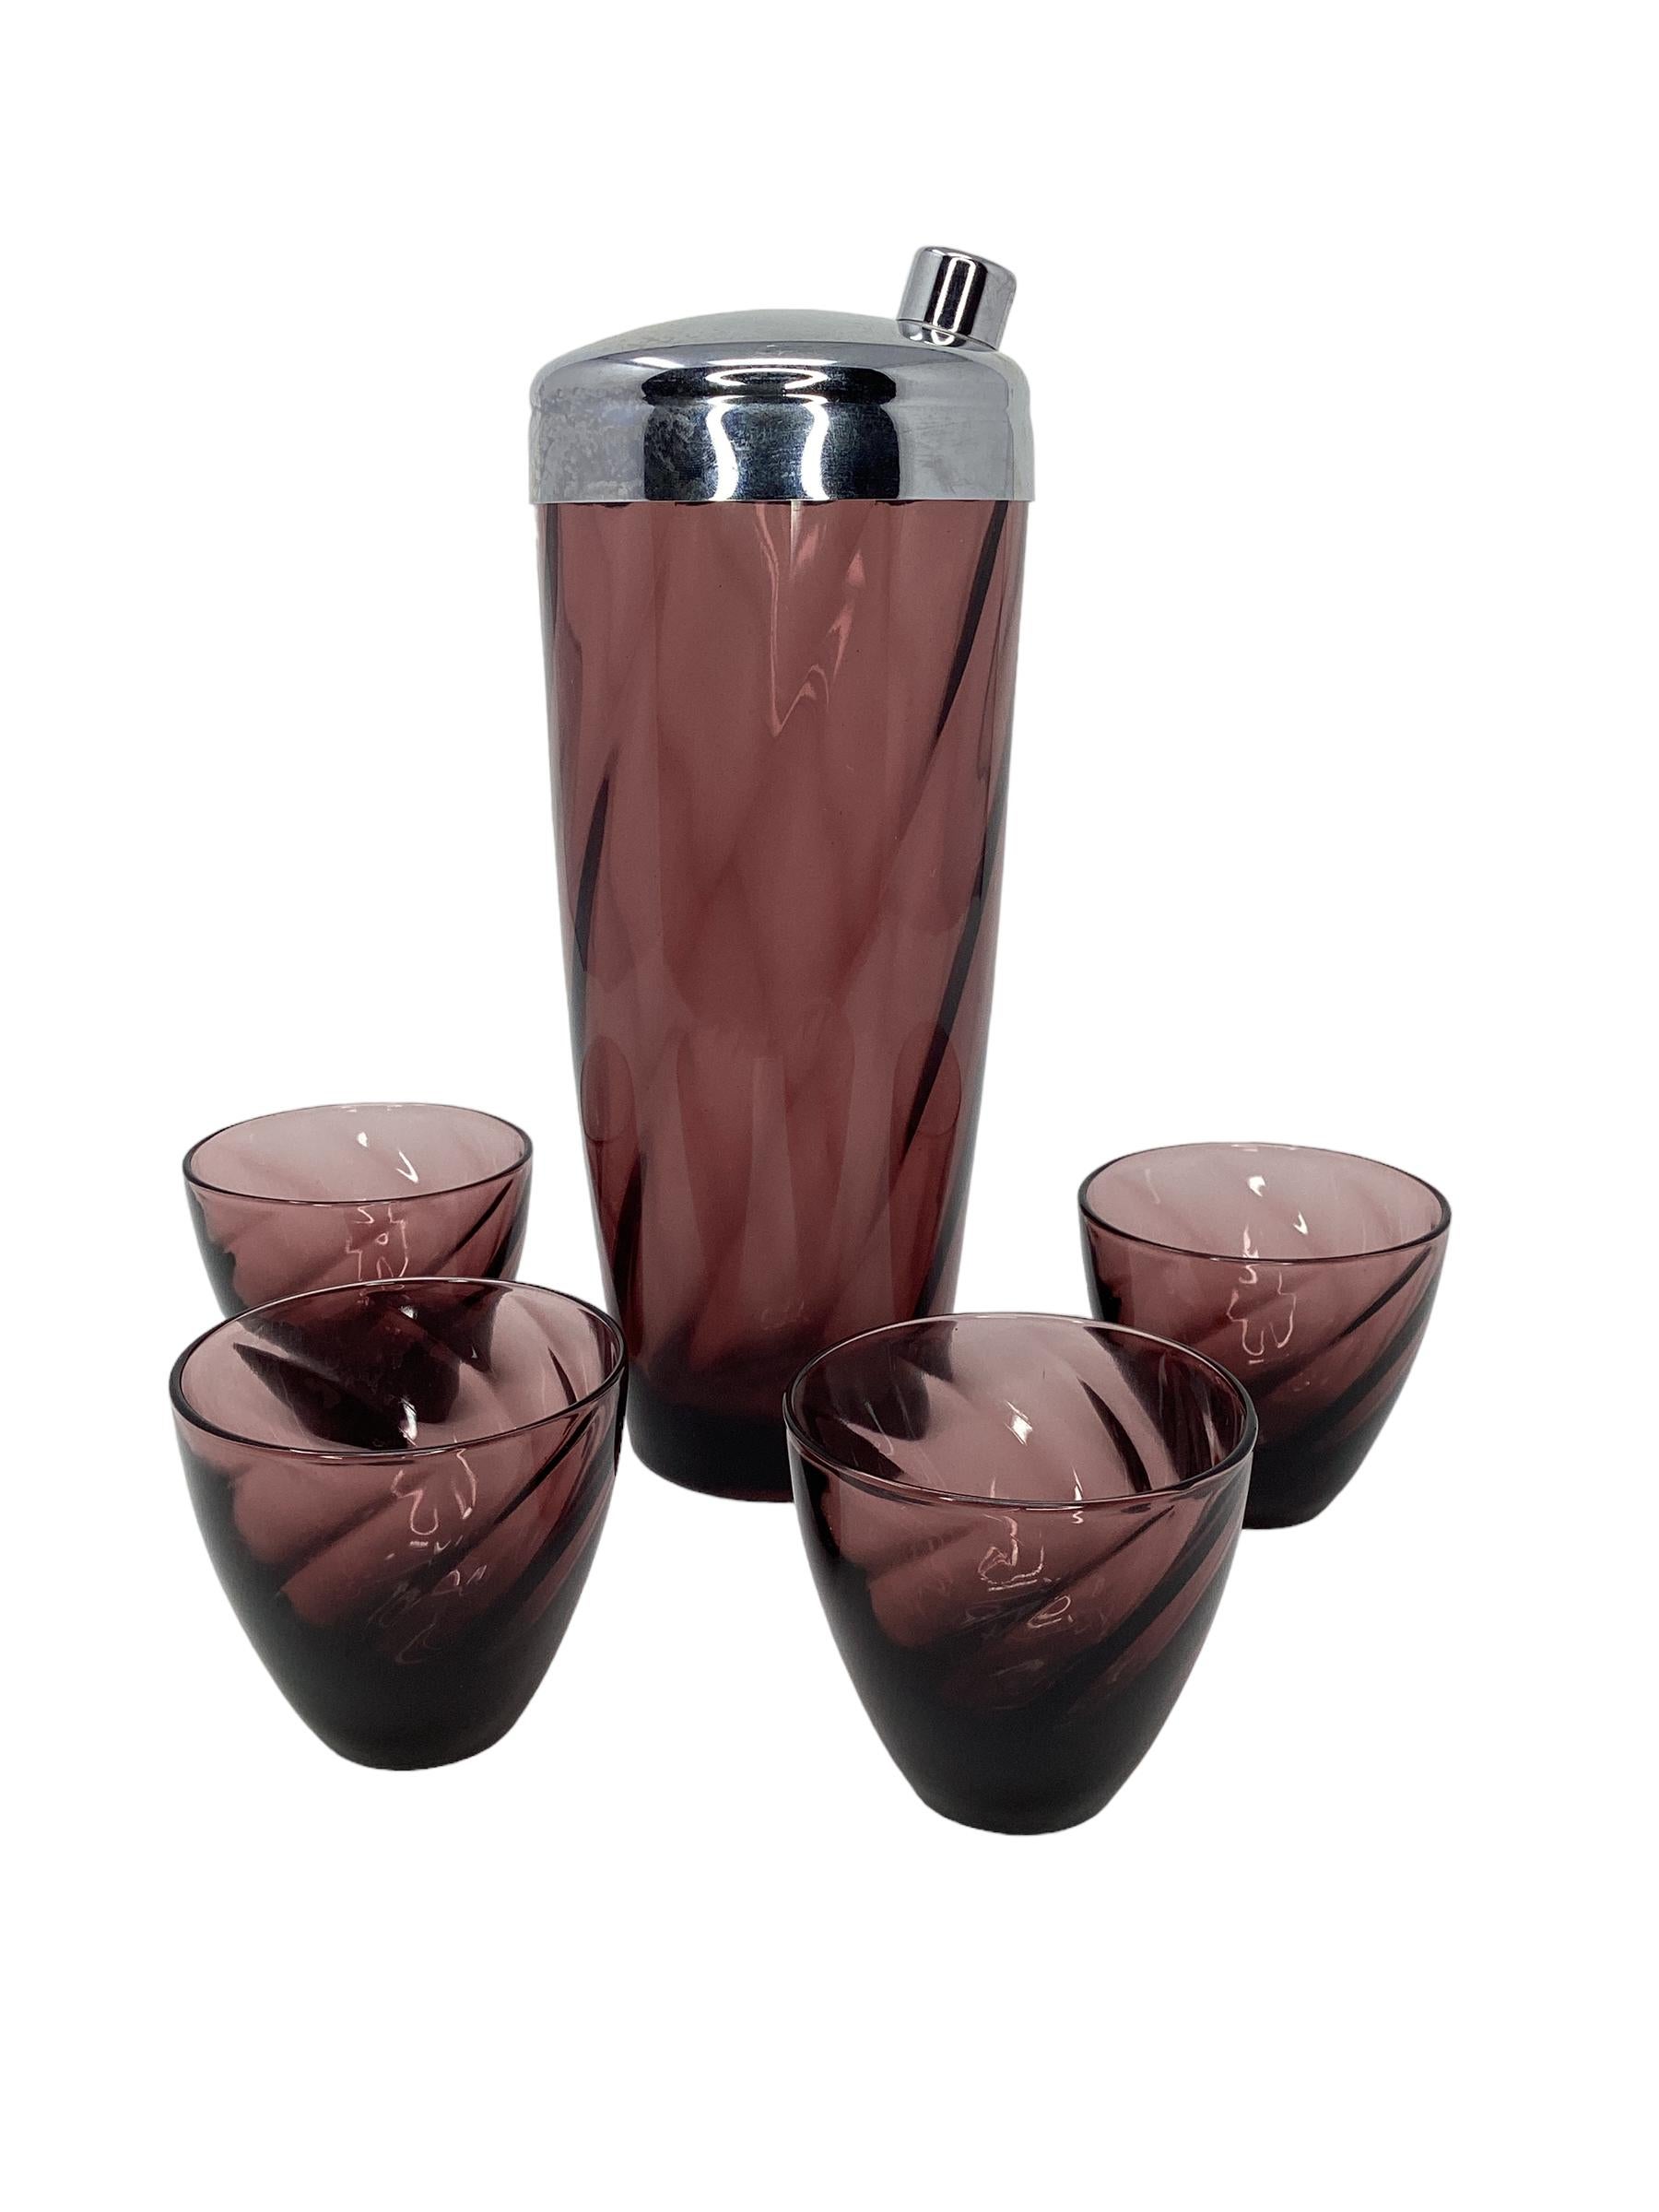 Vintage Moroccan Amethyst Swirl Cocktail Set by Hazel-Atlas. Consisting of a large cocktail shaker with a chrome lid and 4 small cocktail glasses.
Shaker 3.75